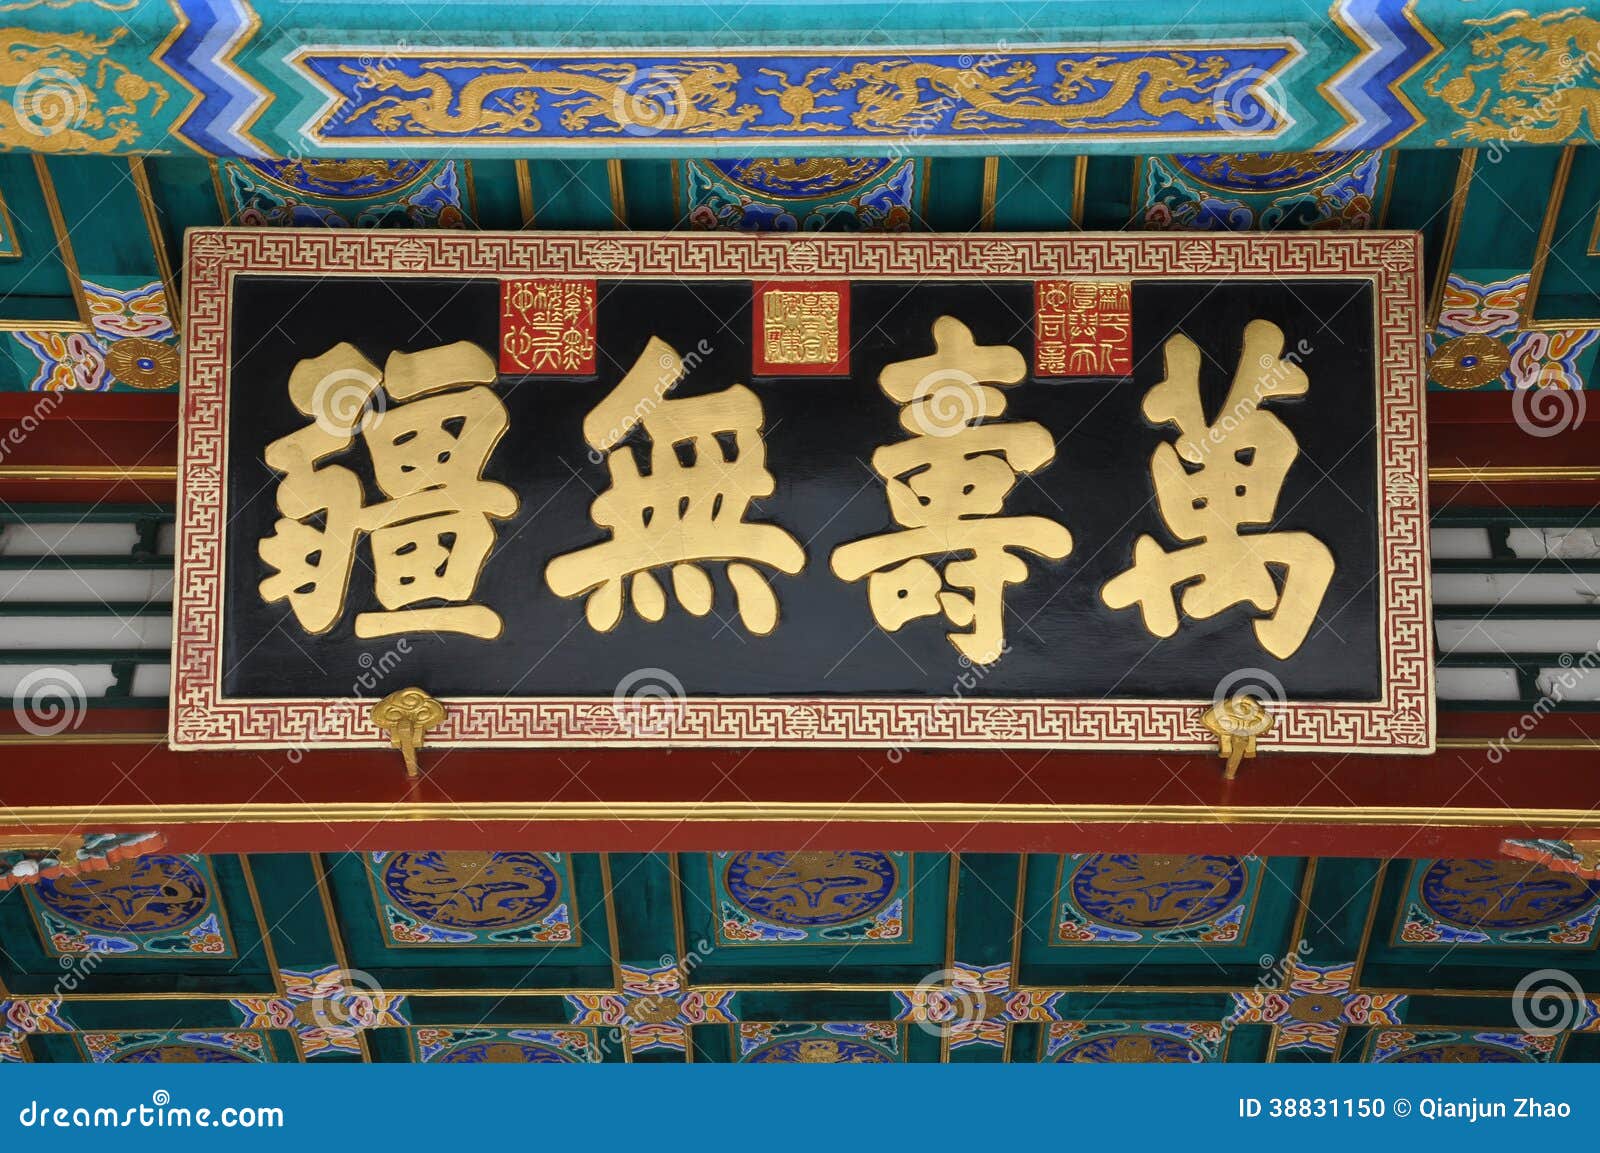 the imperial calligraphy in the summer palace